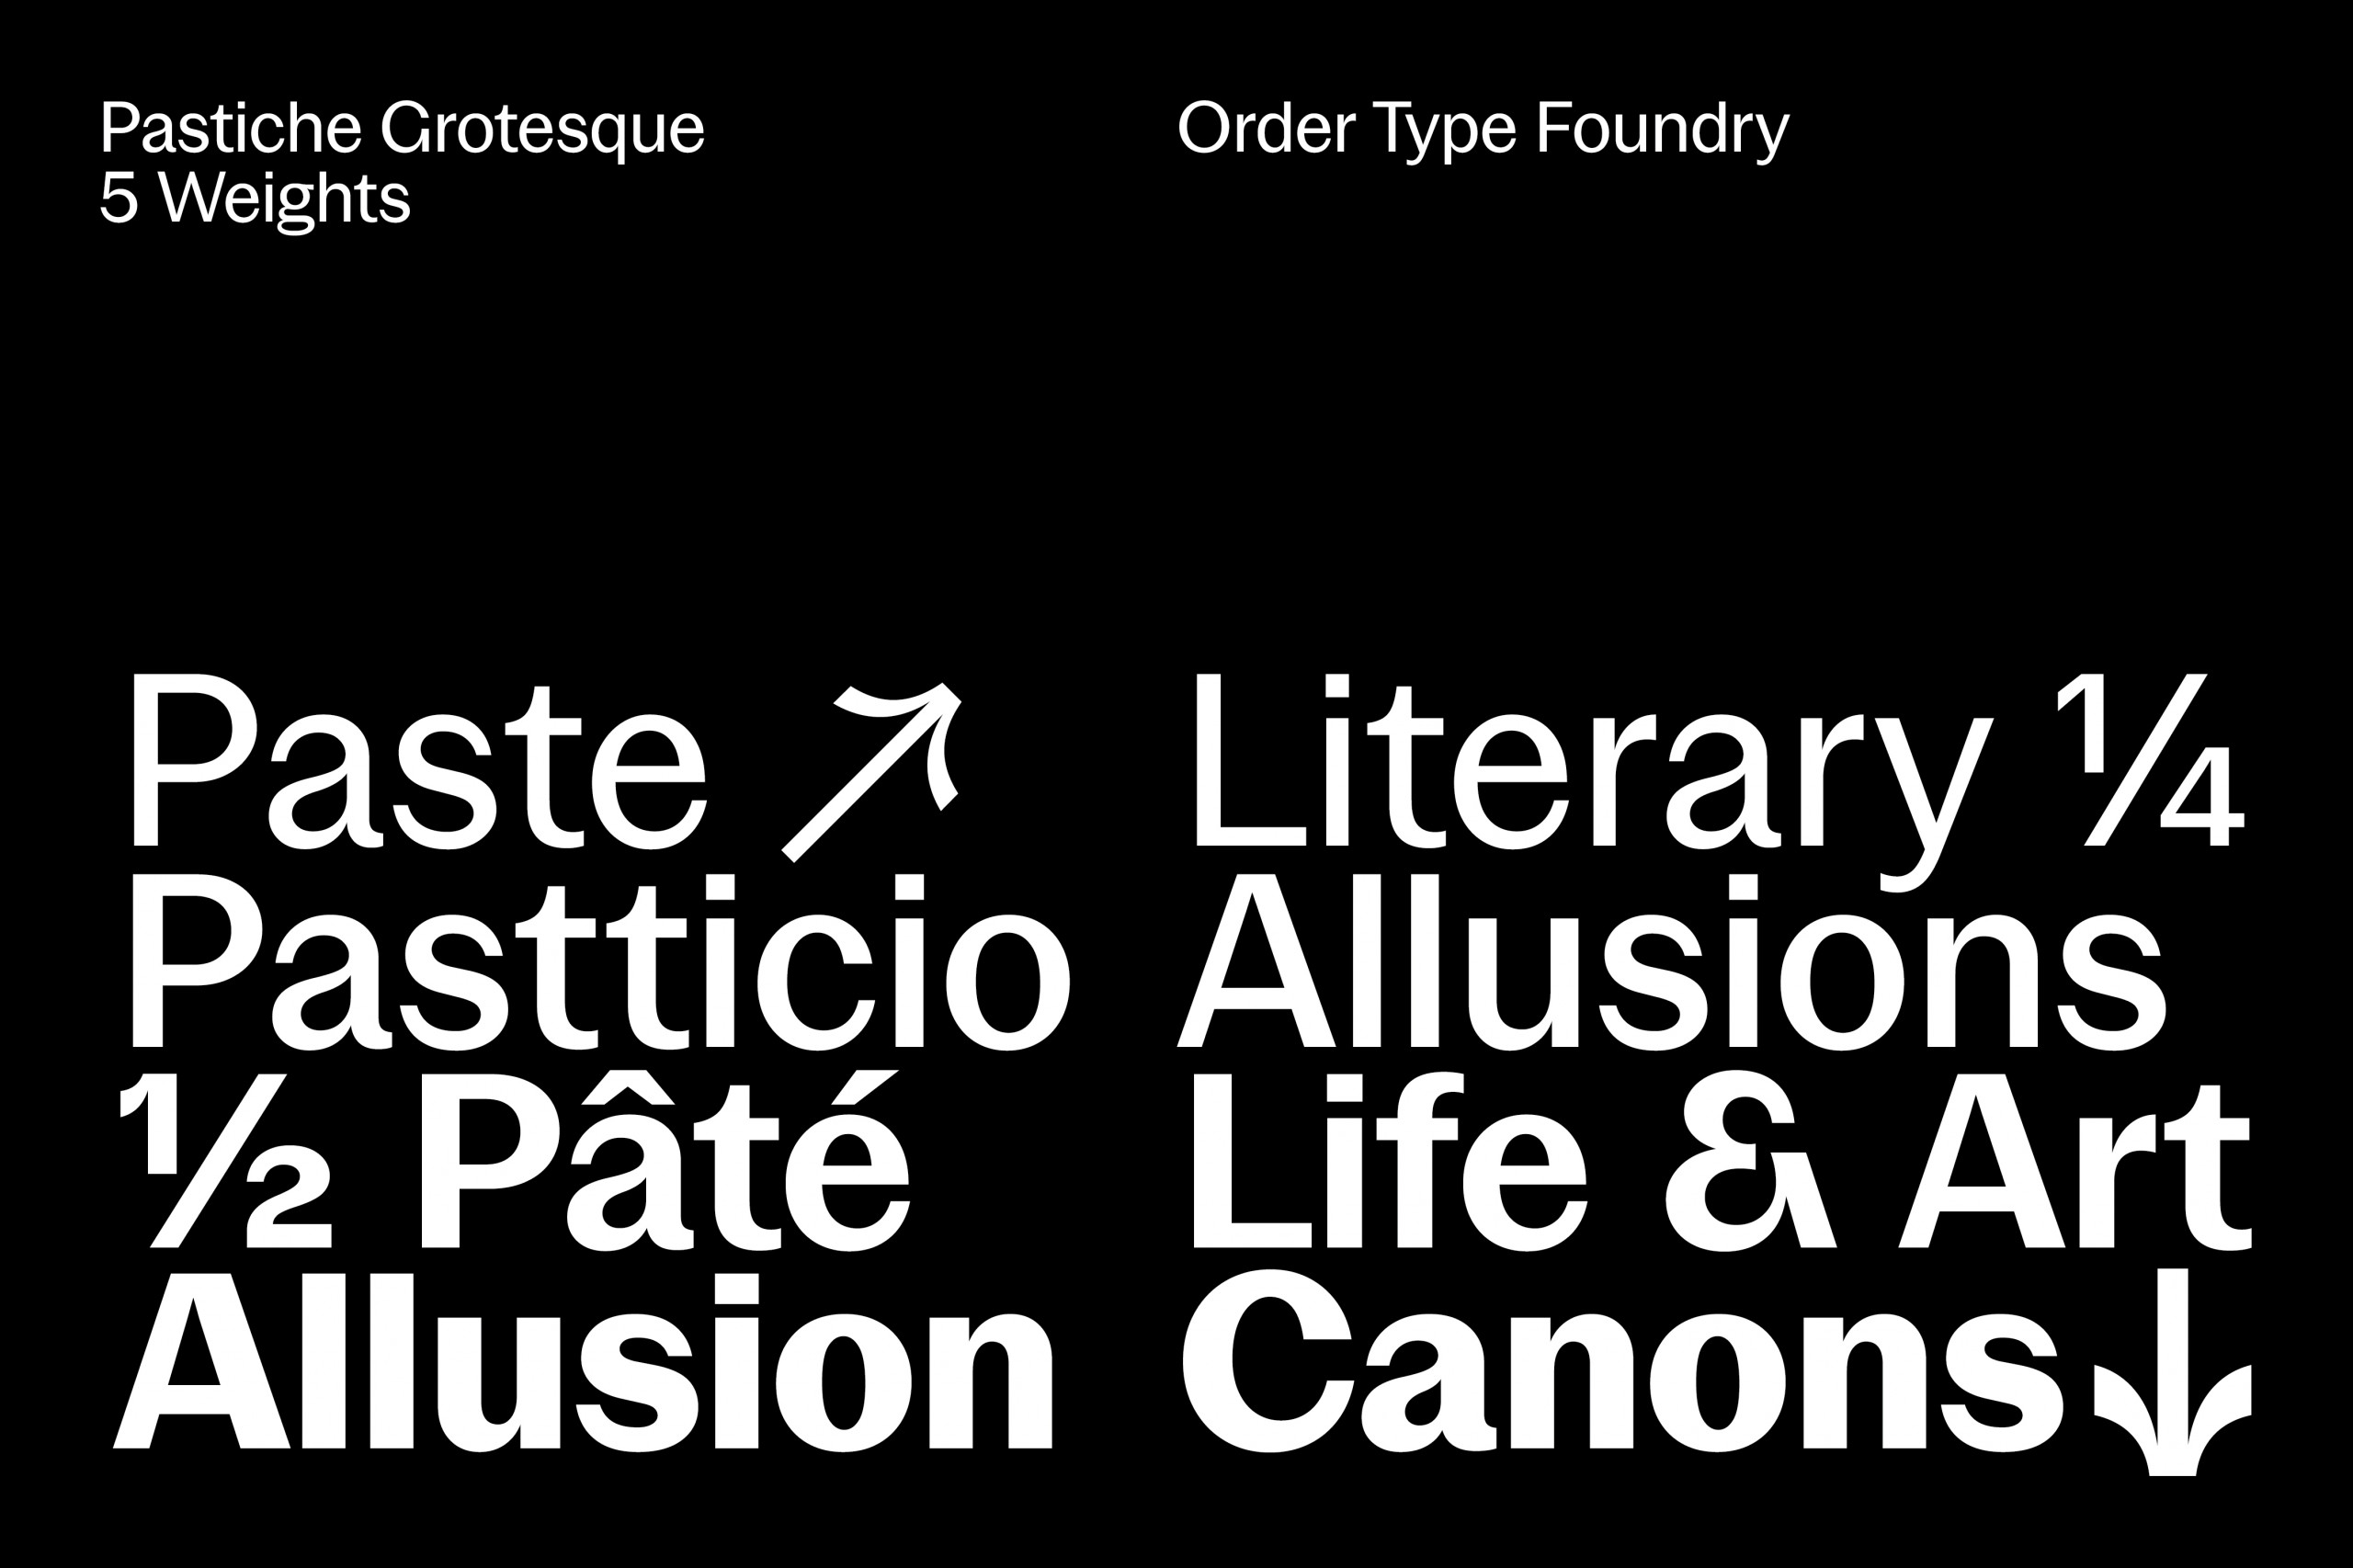 Font design preview for Pastiche Grotesque from Order Type Foundry showcasing 5 weights in a bold, modern style suitable for graphic design.